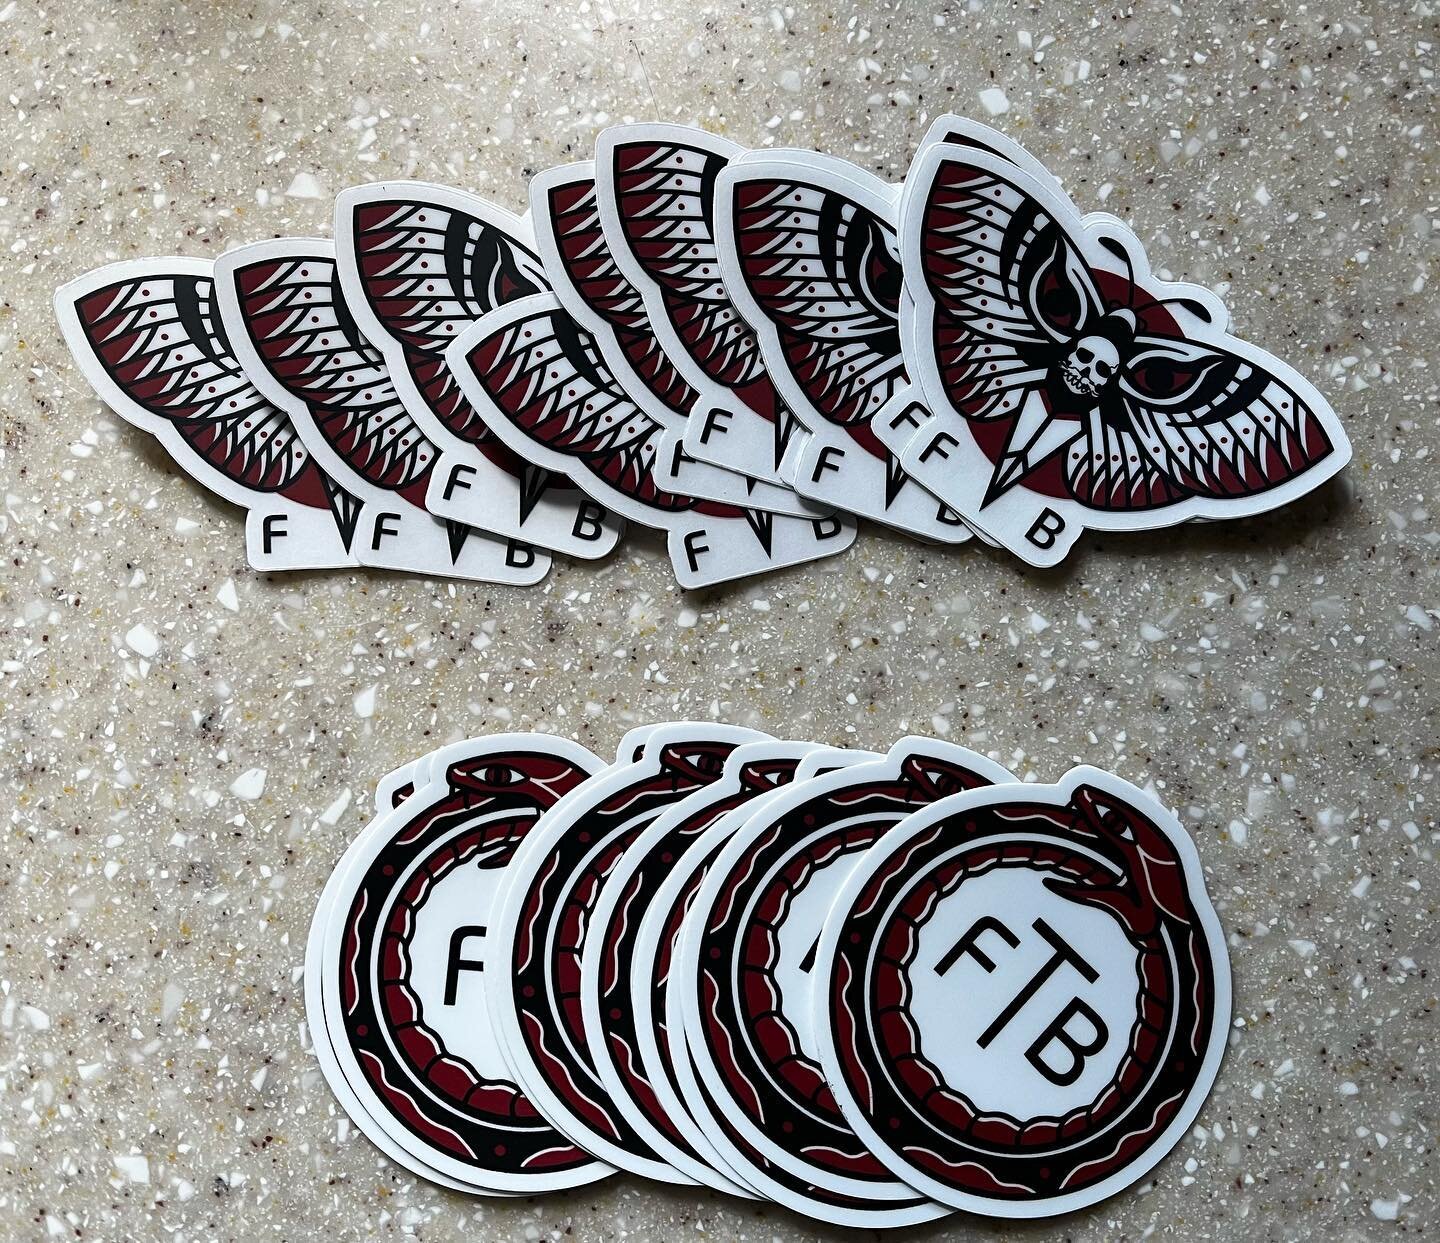 New stickers are in!